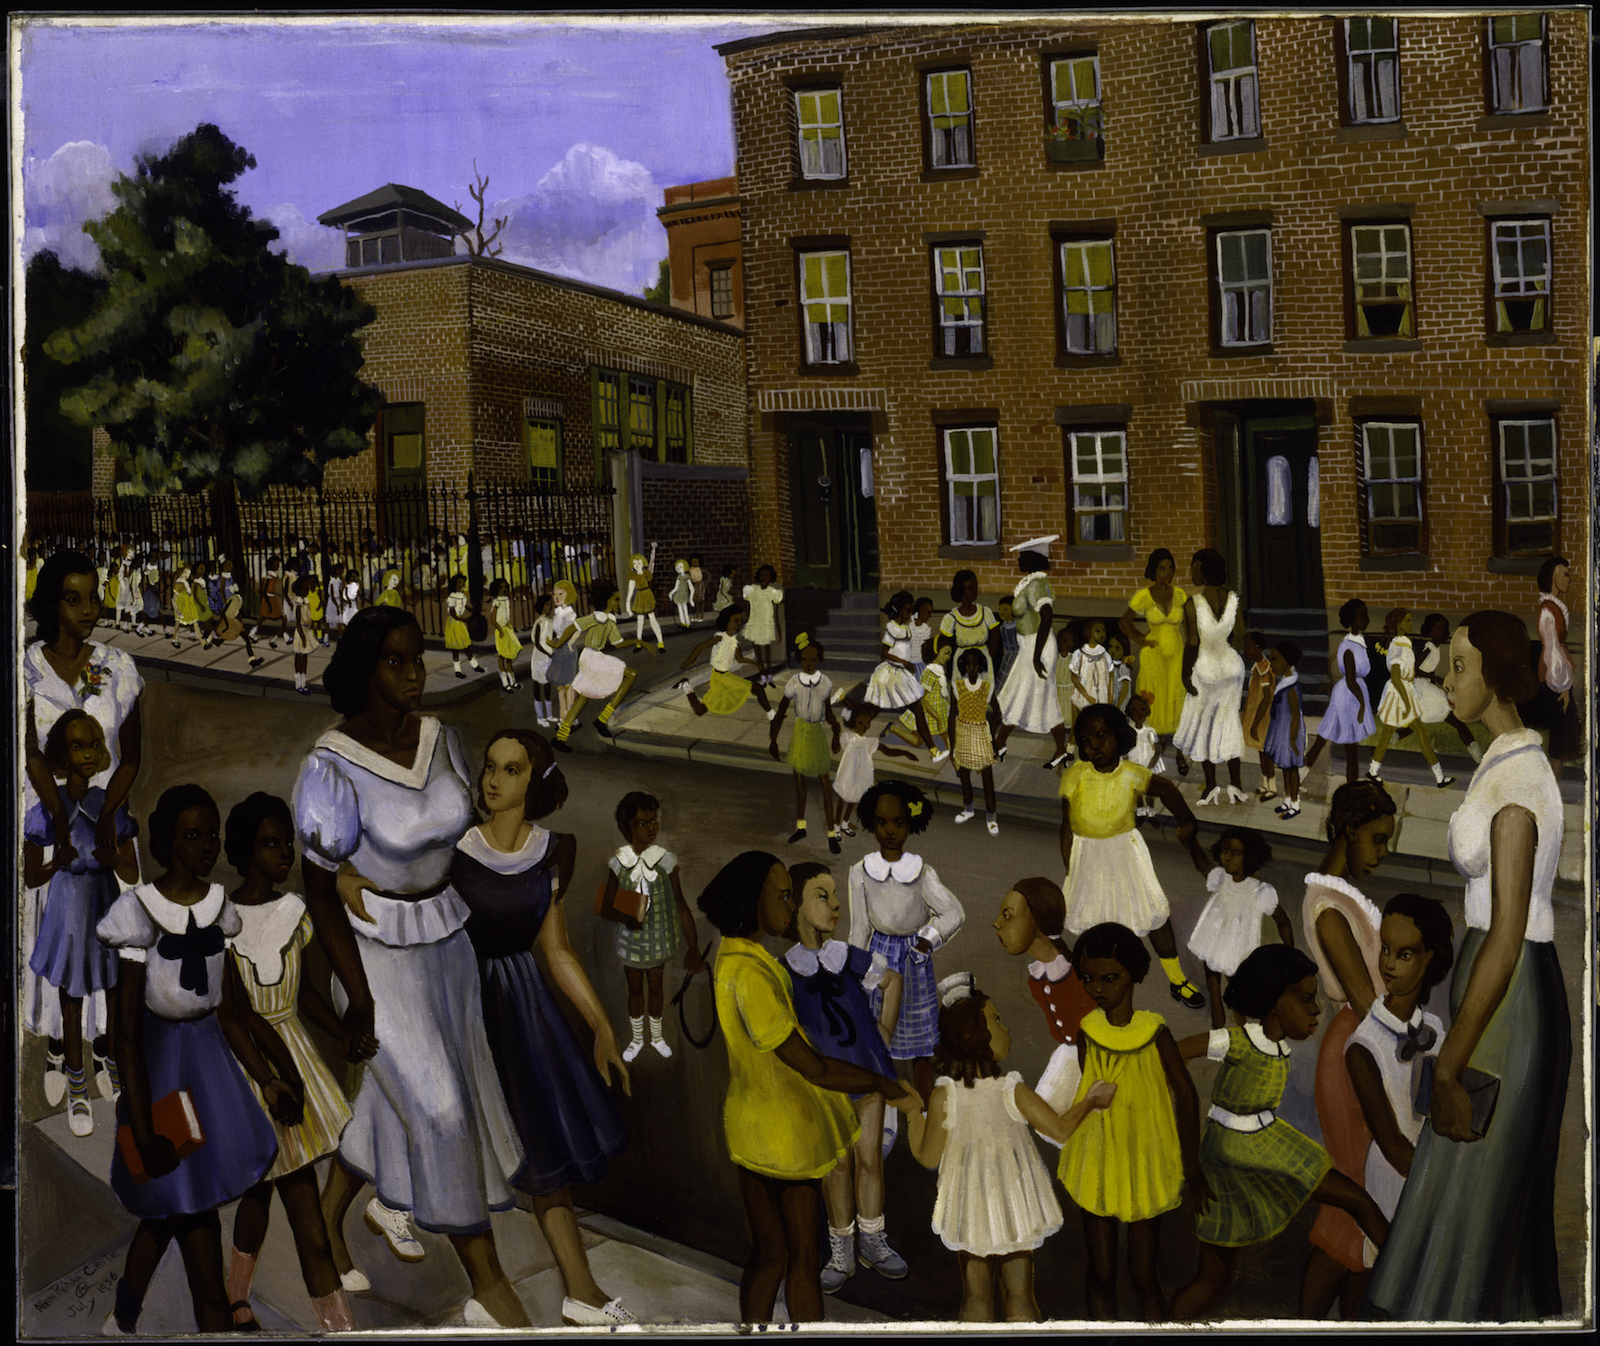 Allan Rohan Crite (1910–2007) School’s Out, 1936 Oil on canvas, 30 x 36 1/8 in. Smithsonian American Art Museum, Washington, DC, transfer from General Services Administration